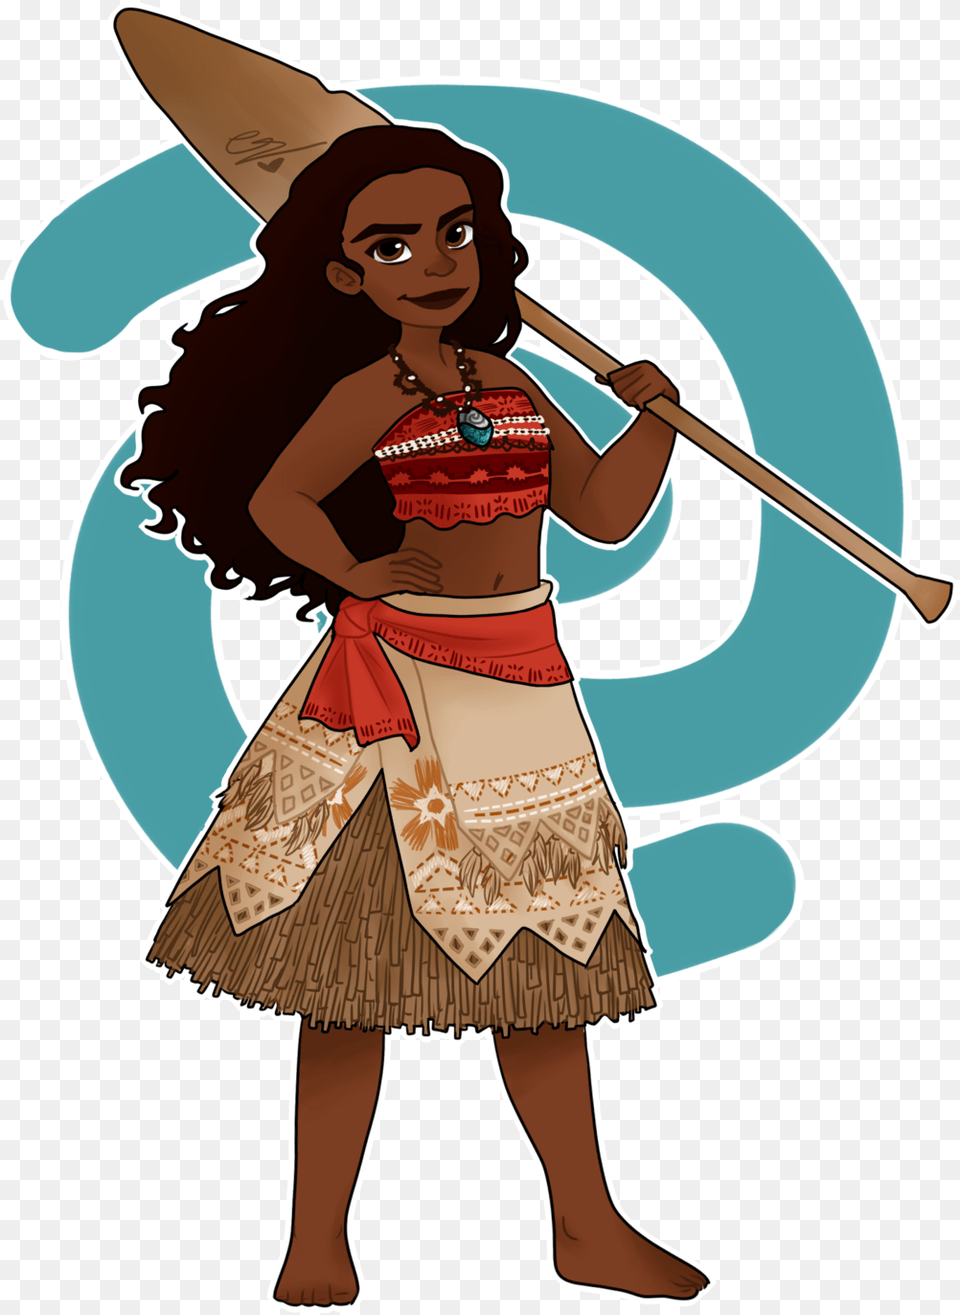 Download Moana Of Motunui By Simpaticasx2 Moana Clip Art Maori People Clipart, Clothing, Costume, Person, Adult Png Image